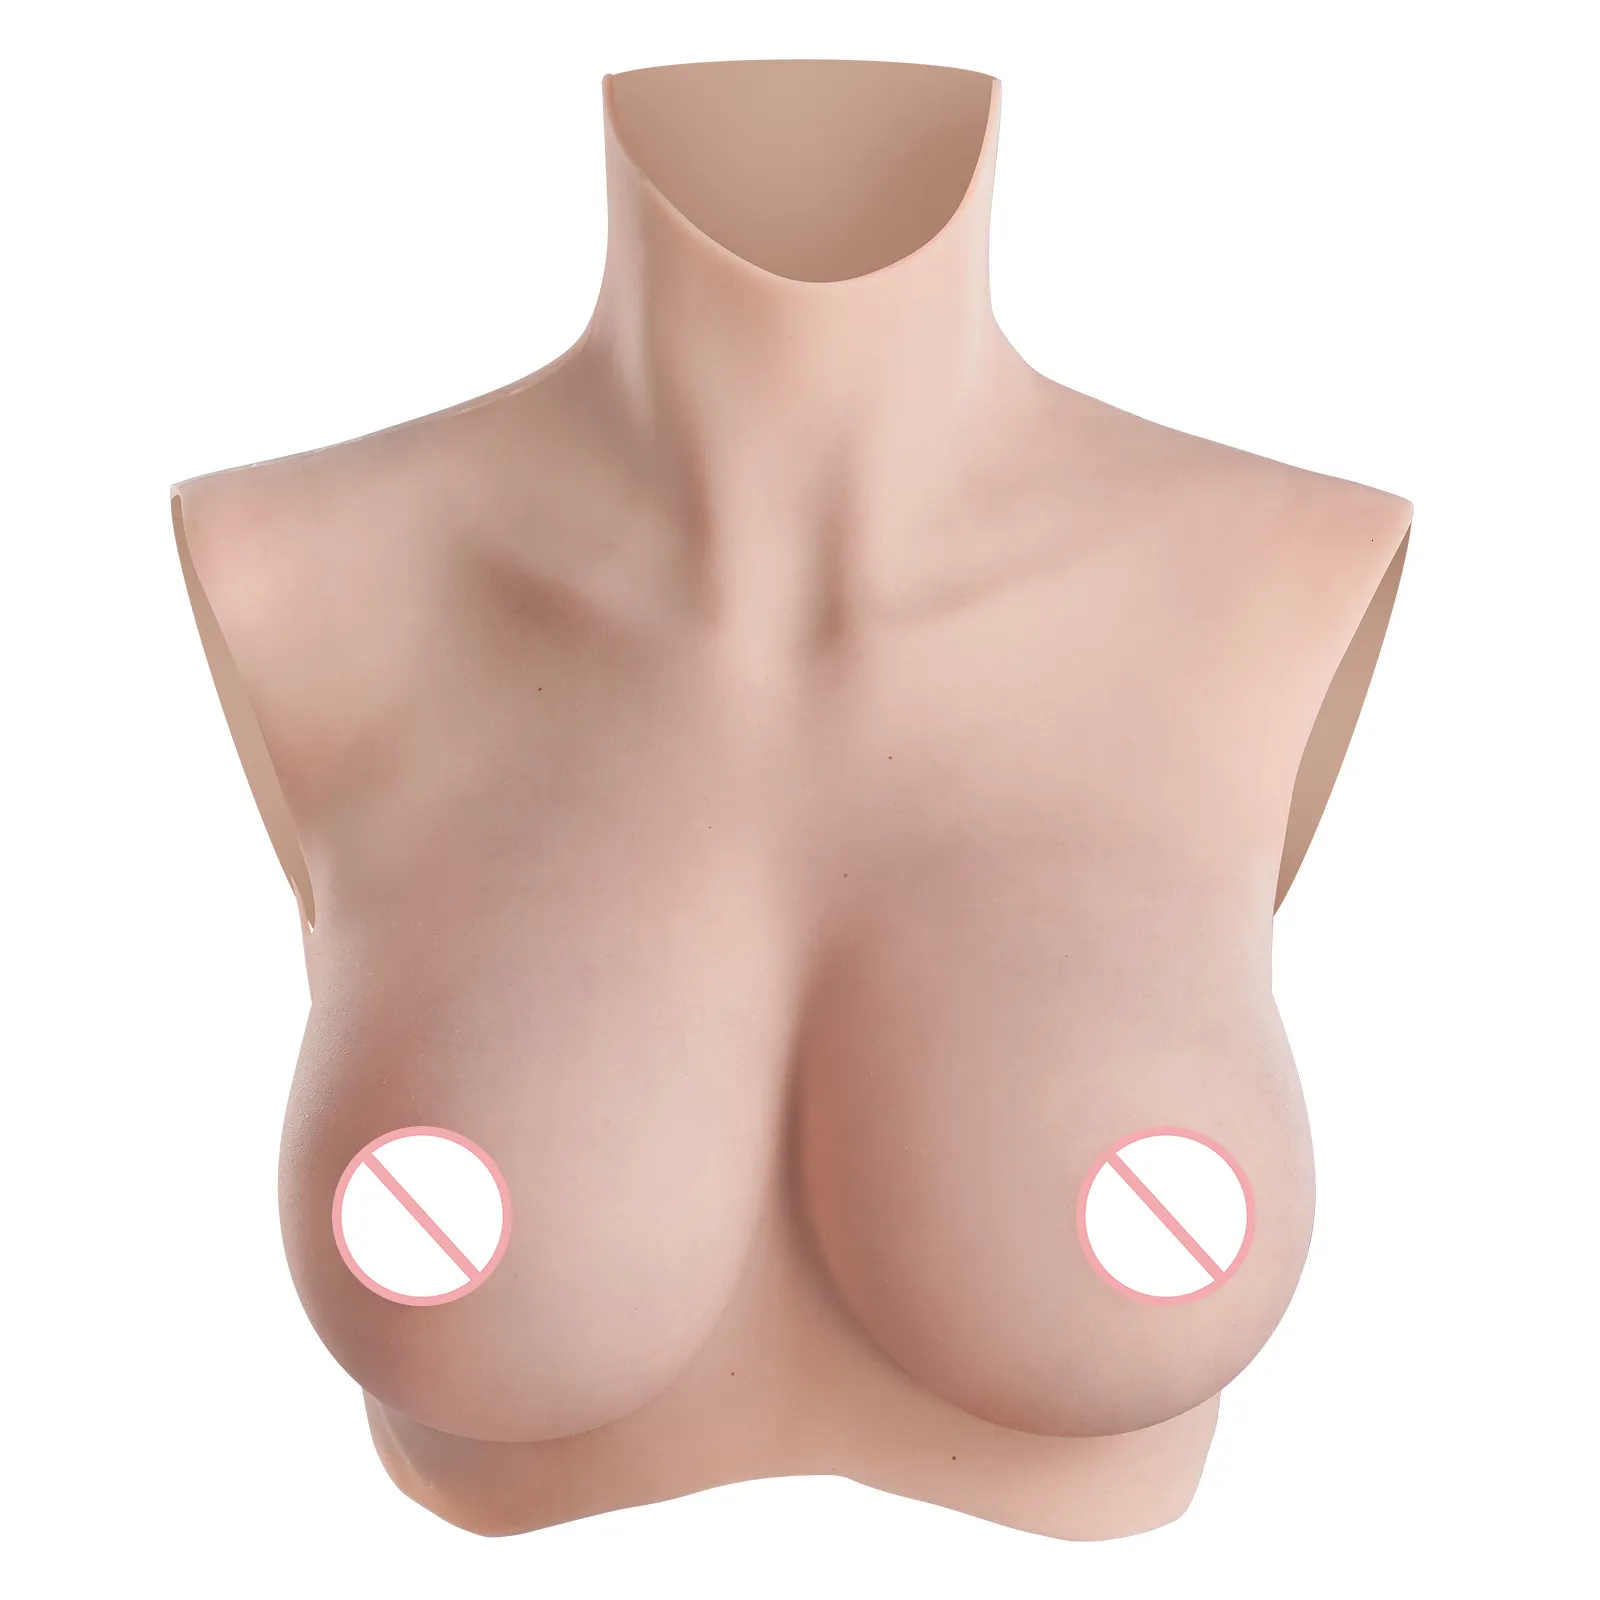 KUMIHO 8G Realistic Silicone Z Cup Breast Forms With Airbag No Oil, Ideal  For Transgender And Crossdressers From Wai04, $187.62